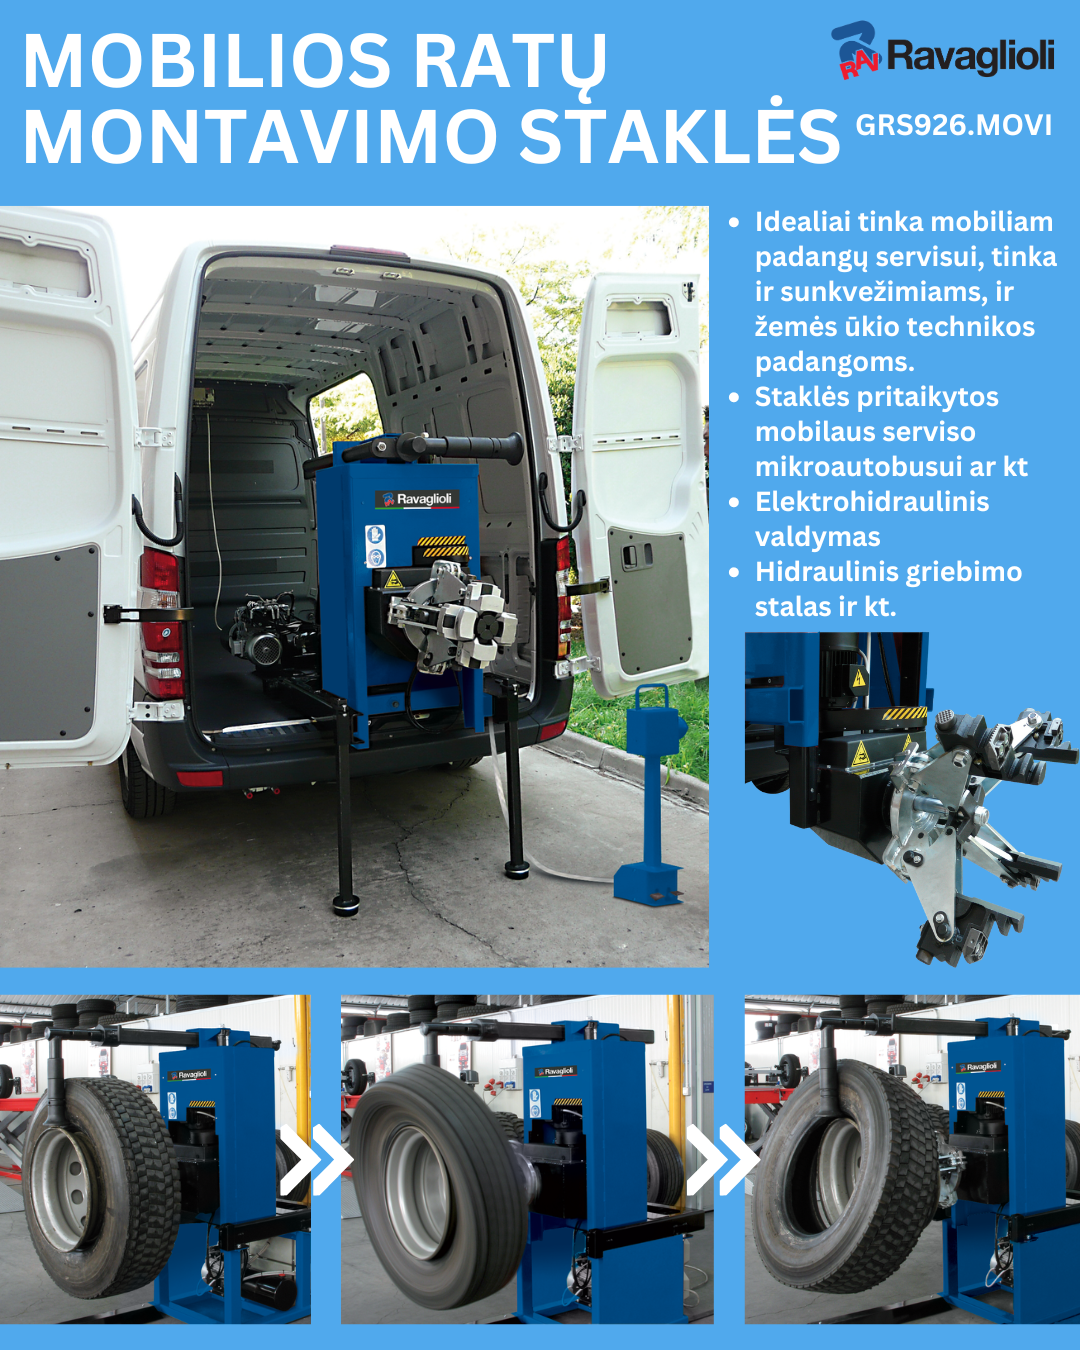 Italian Mobile Tyre changer machine GRS926.MOVI RAVAGLIOLI – The Best Choice for Truck